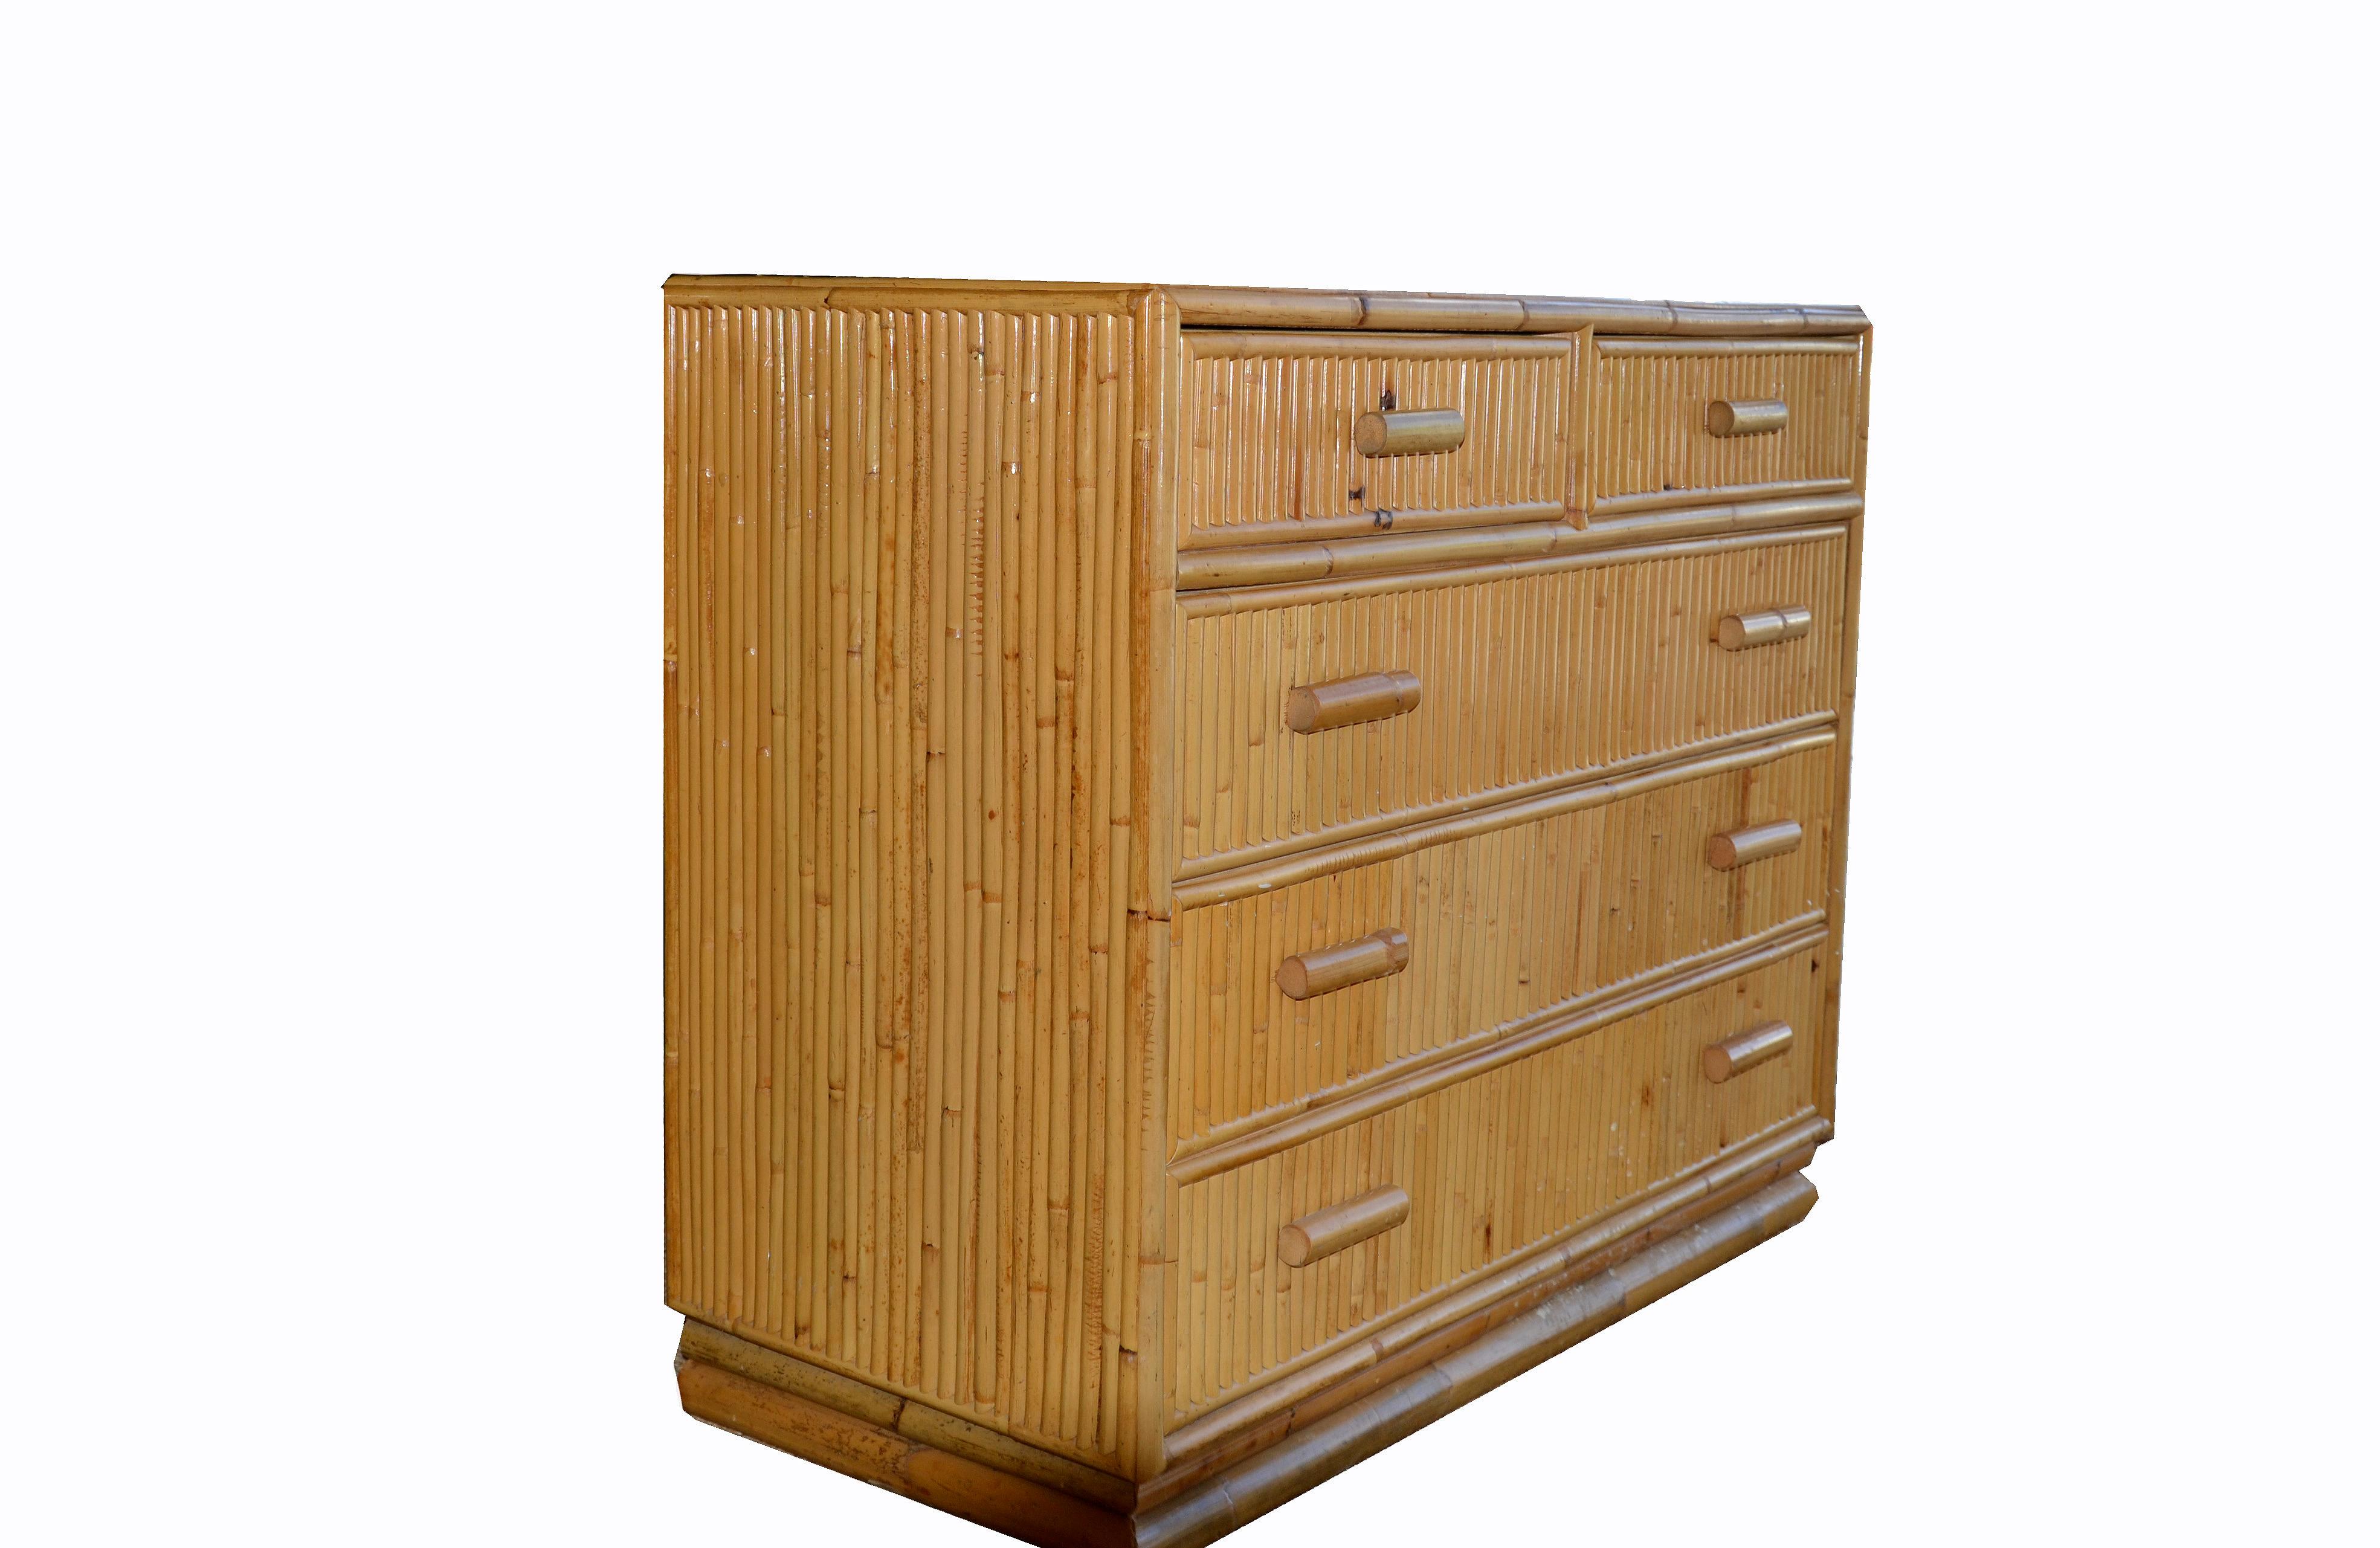 Beautiful five drawers bamboo dresser, chest of drawers from the 1970s.
Handles are handcrafted all in bamboo sticks.
Looks great all around.